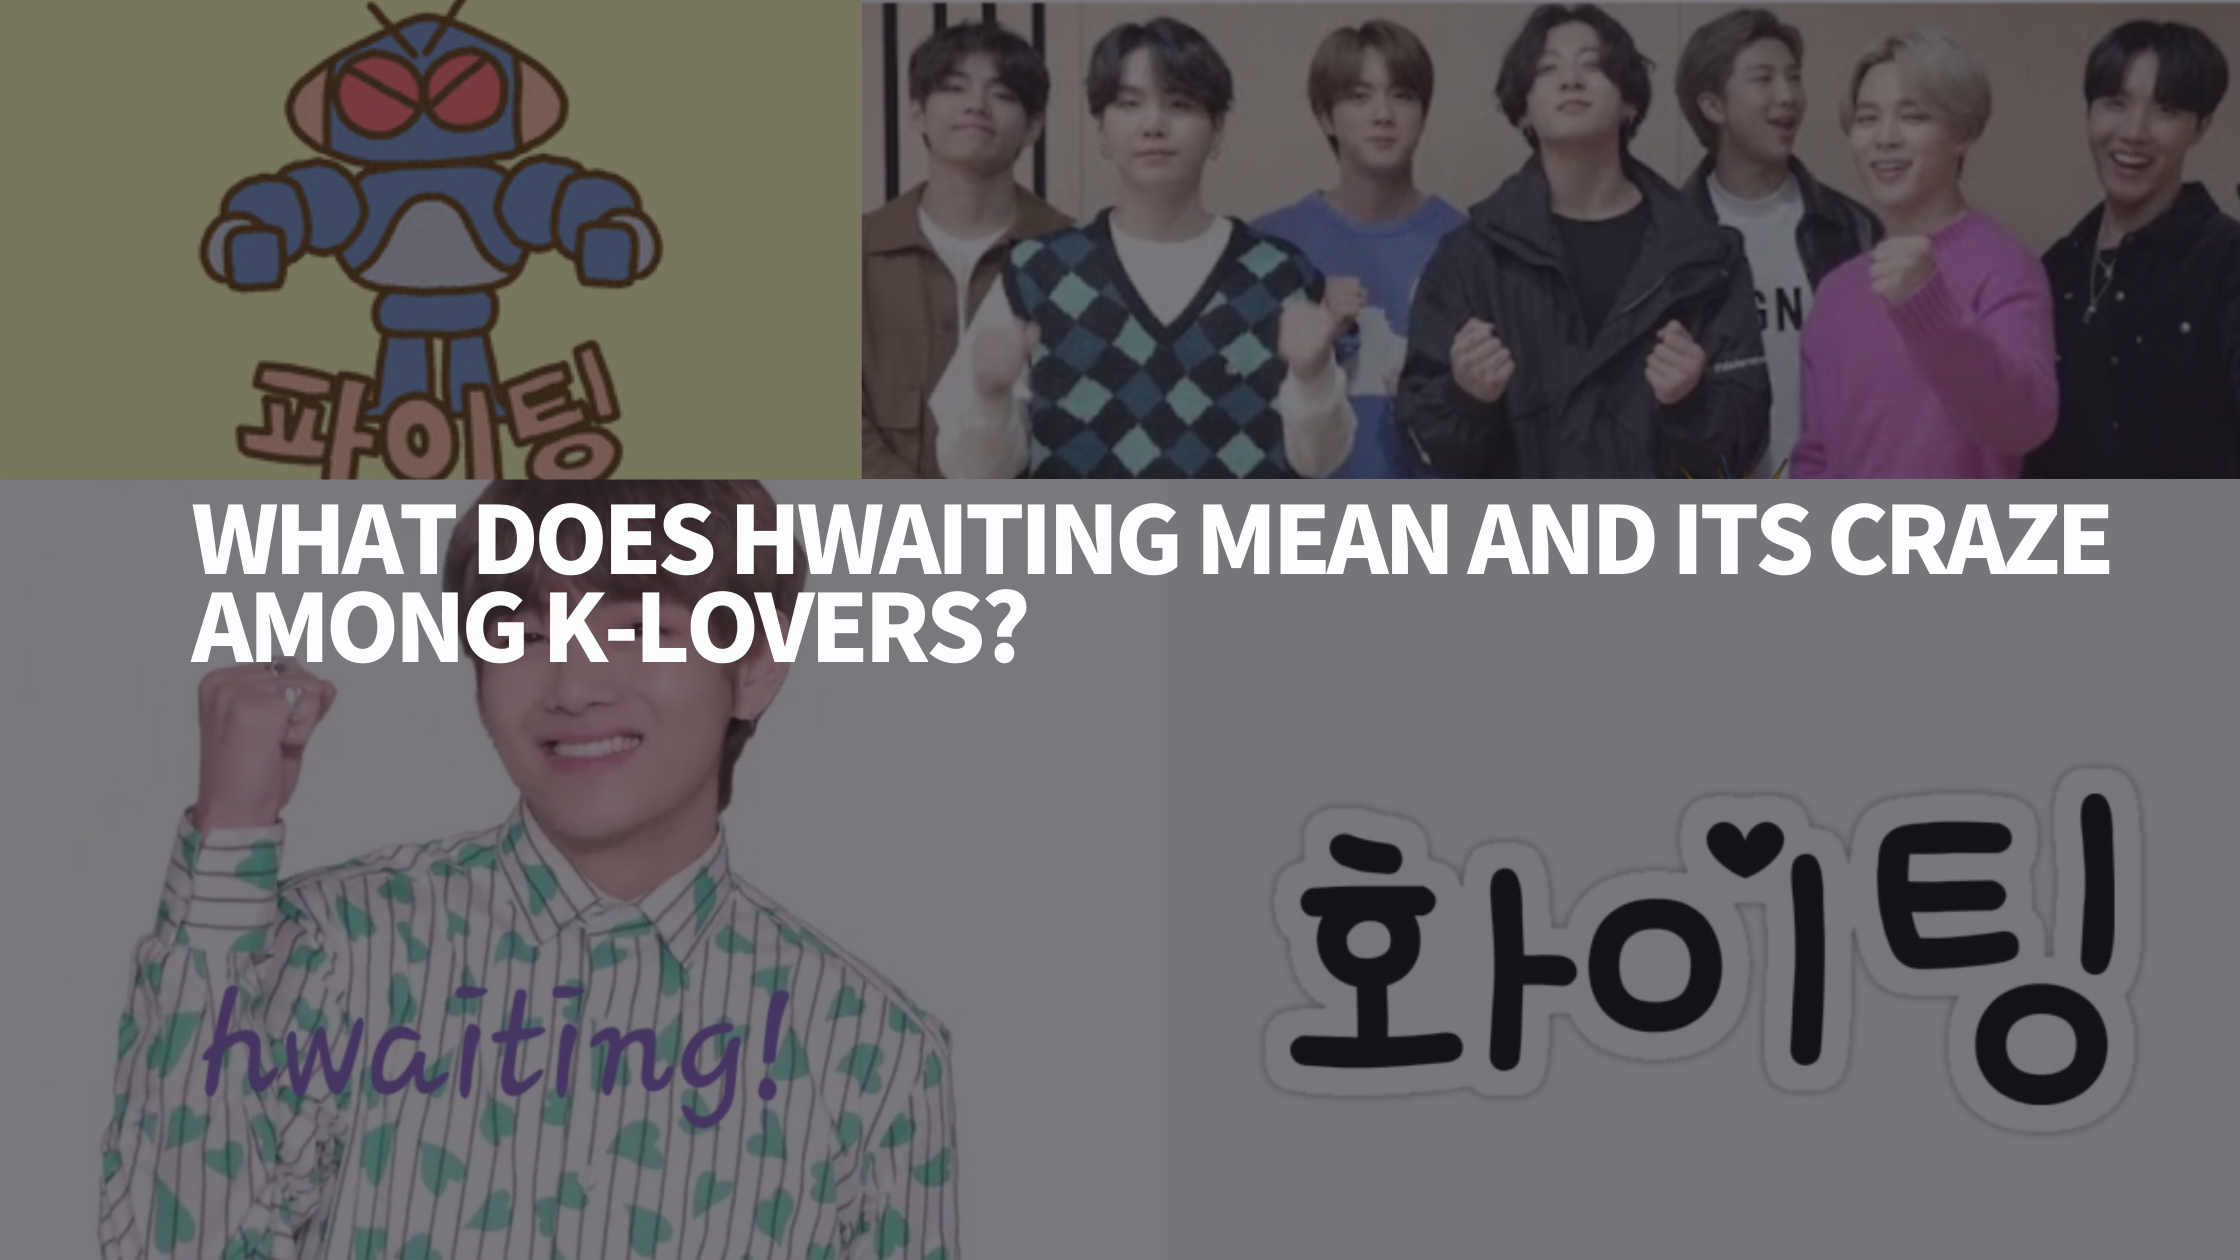 WHAT DOES HWAITING MEAN AND ITS CRAZE AMONG K